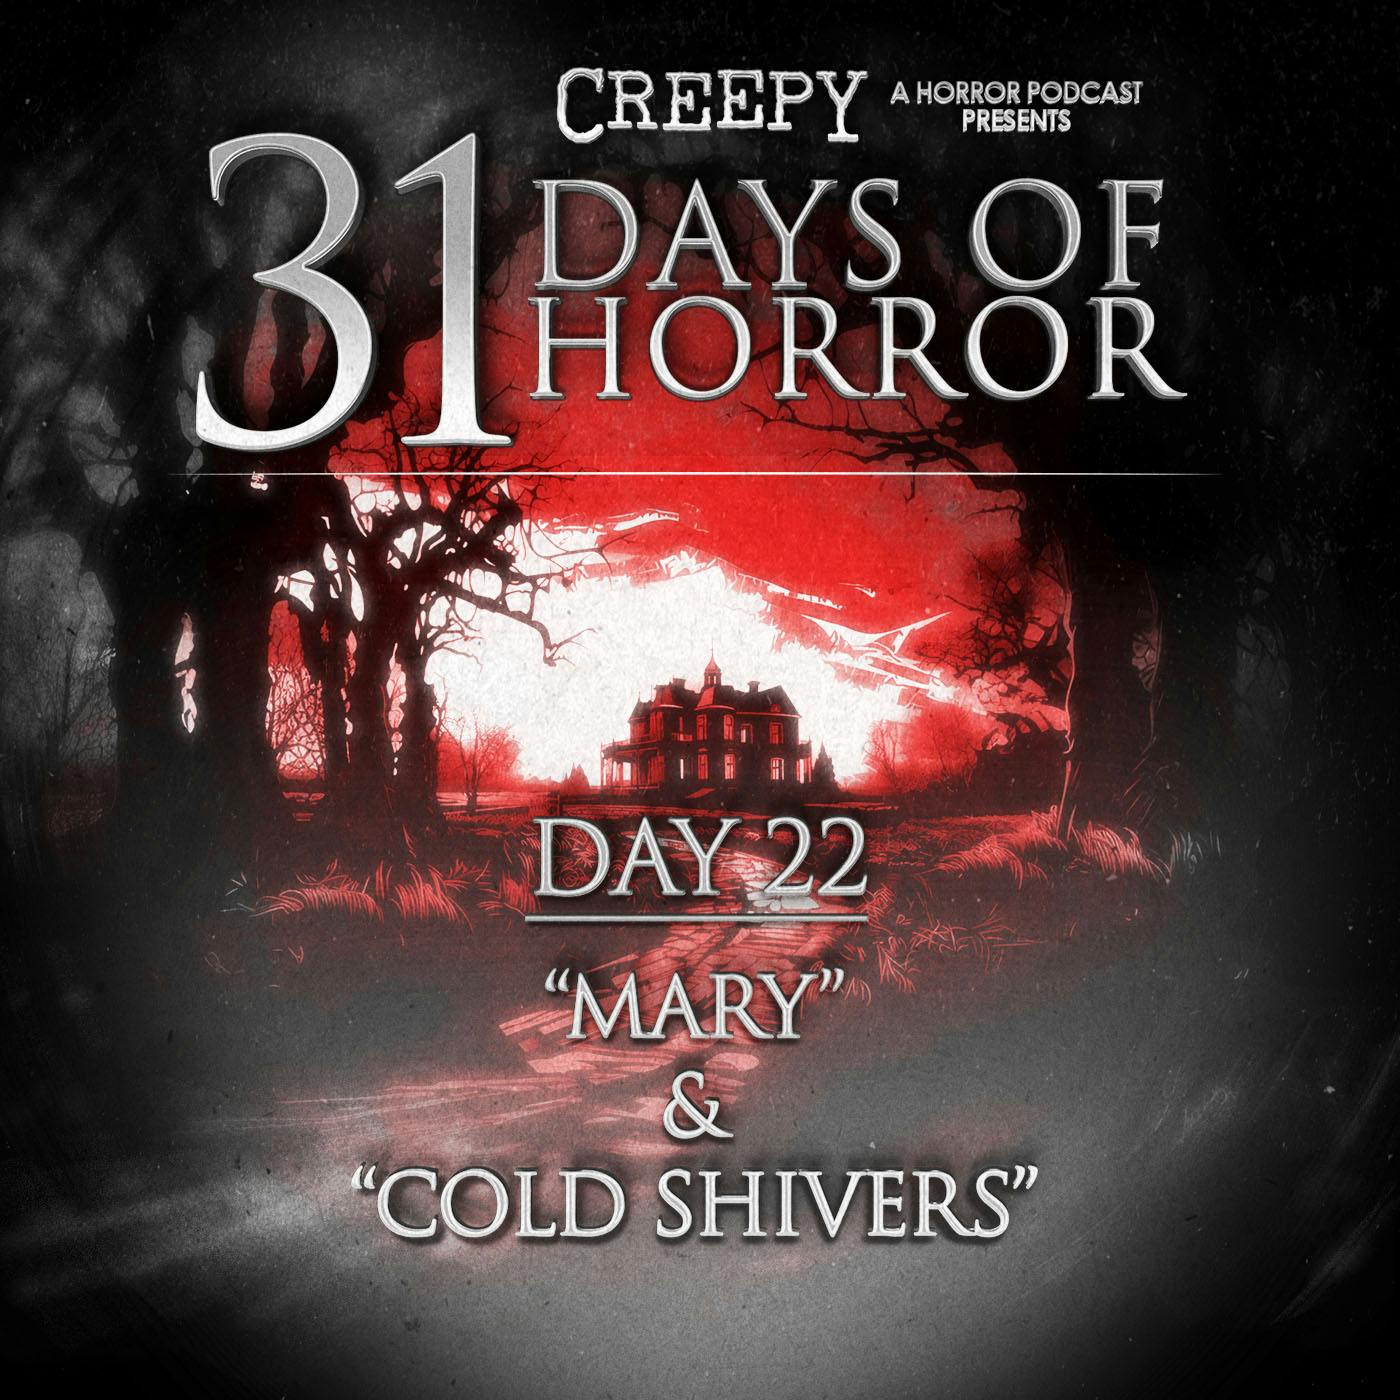 Day 22 - Mary & Cold Shivers